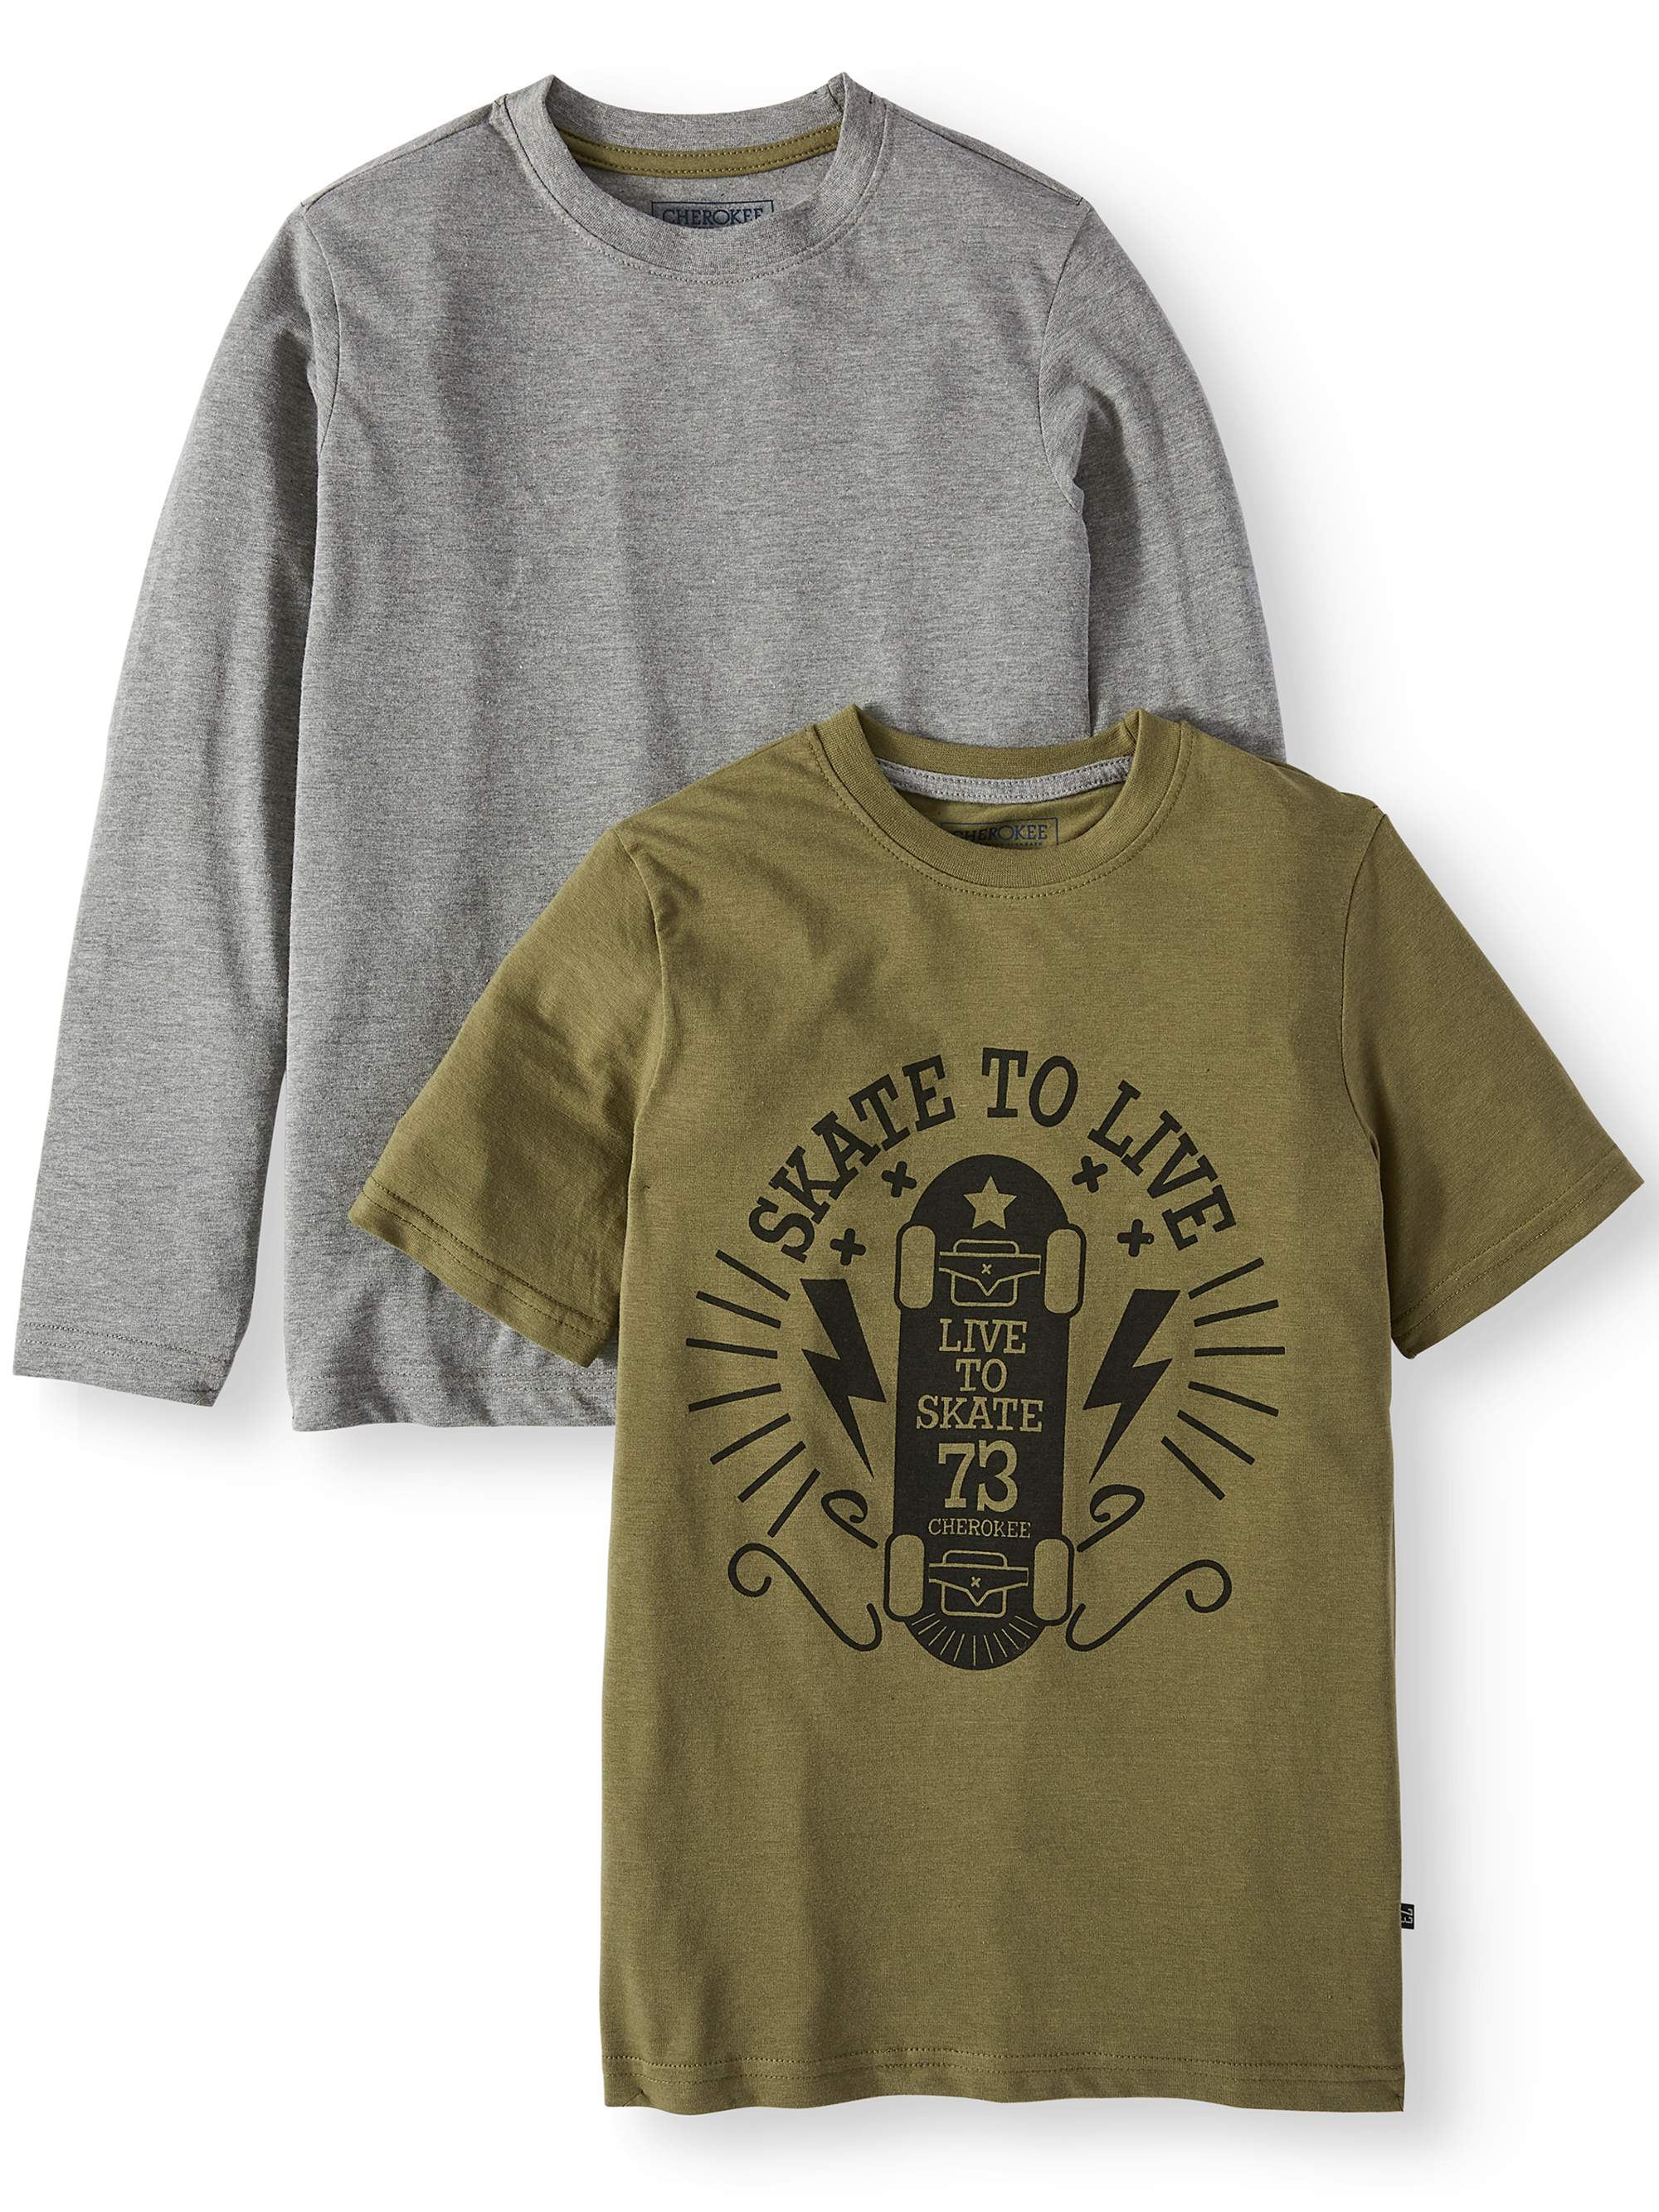 Graphic Short Sleeve Tee with Heather Long Sleeve, 2-Pack Set (Little Boys & Big Boys) - image 1 of 3